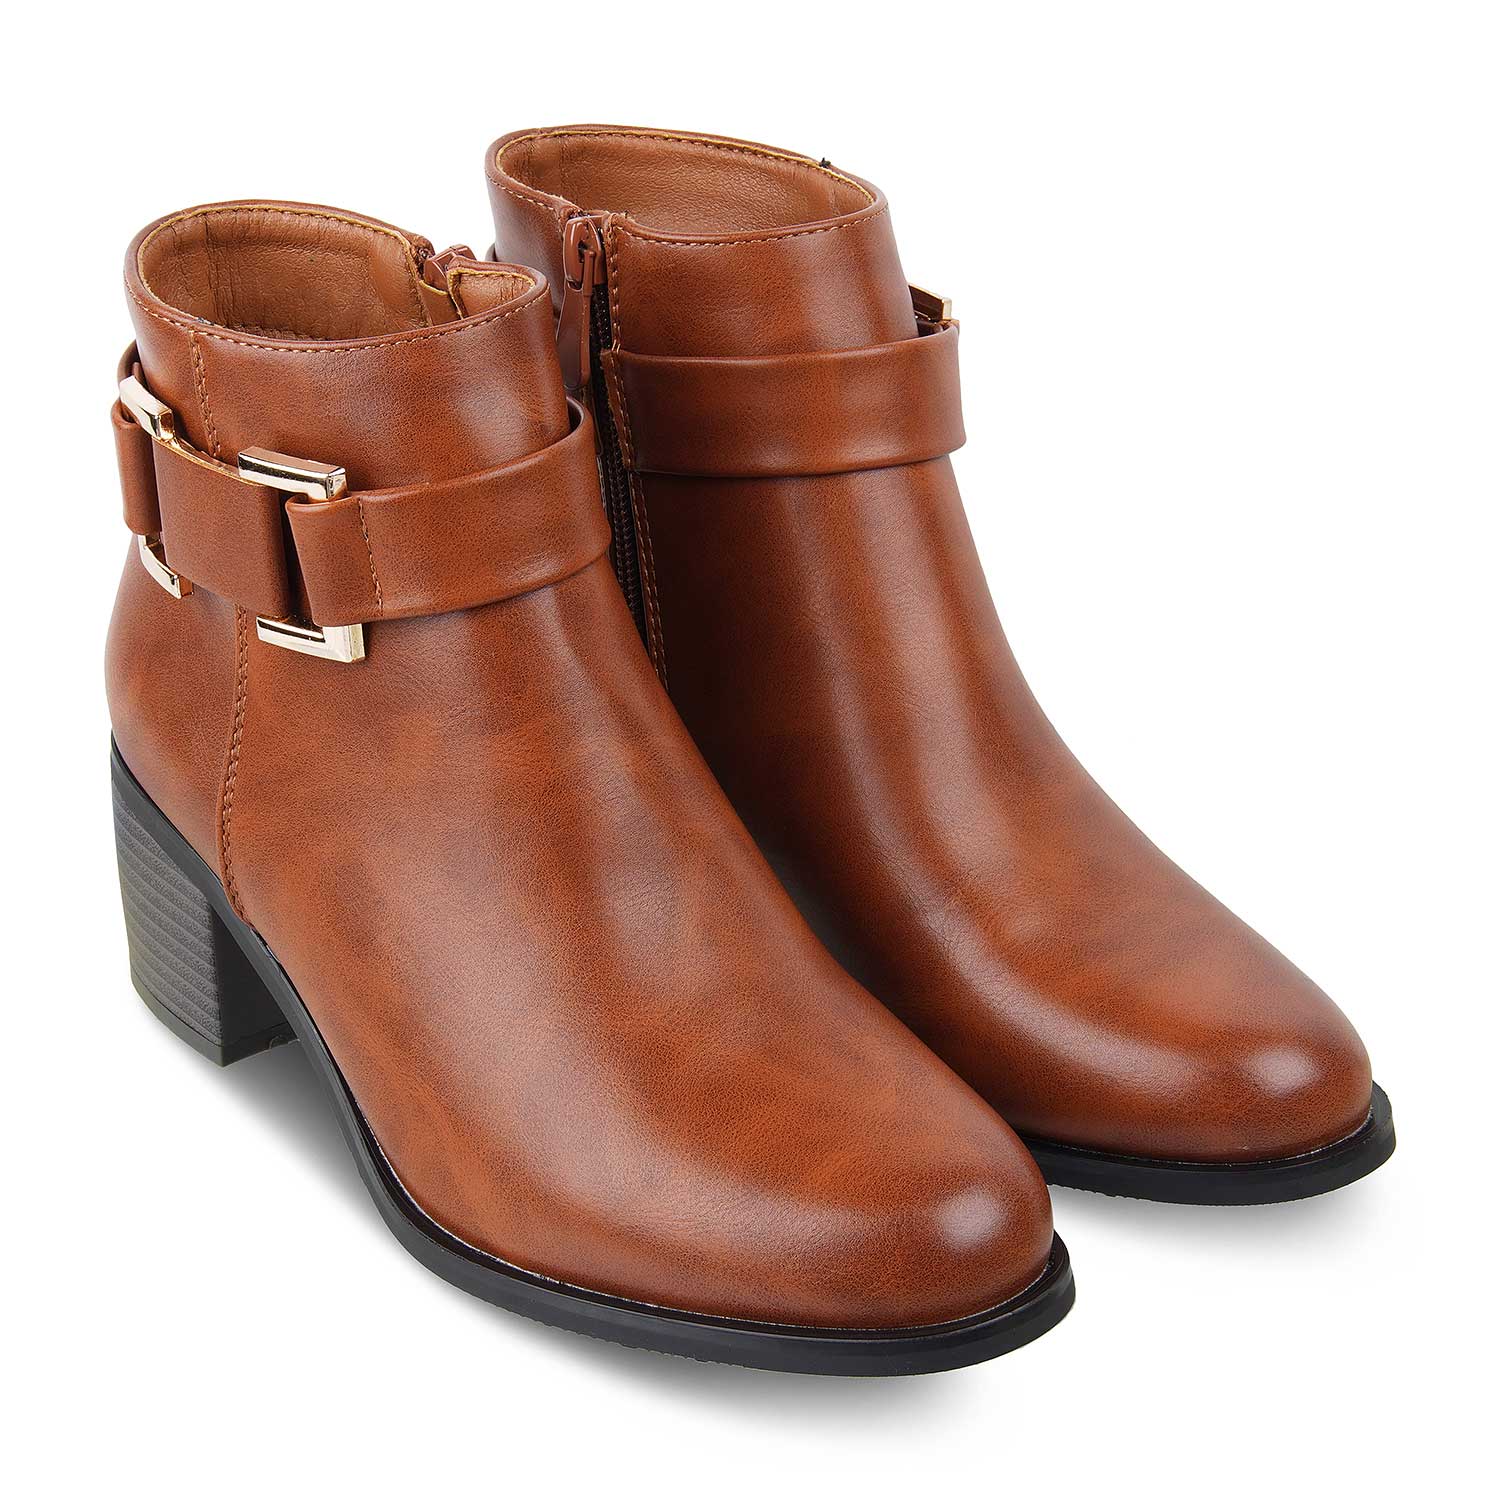 The Seine Camel Women's Ankle-length Boots Tresmode - Tresmode